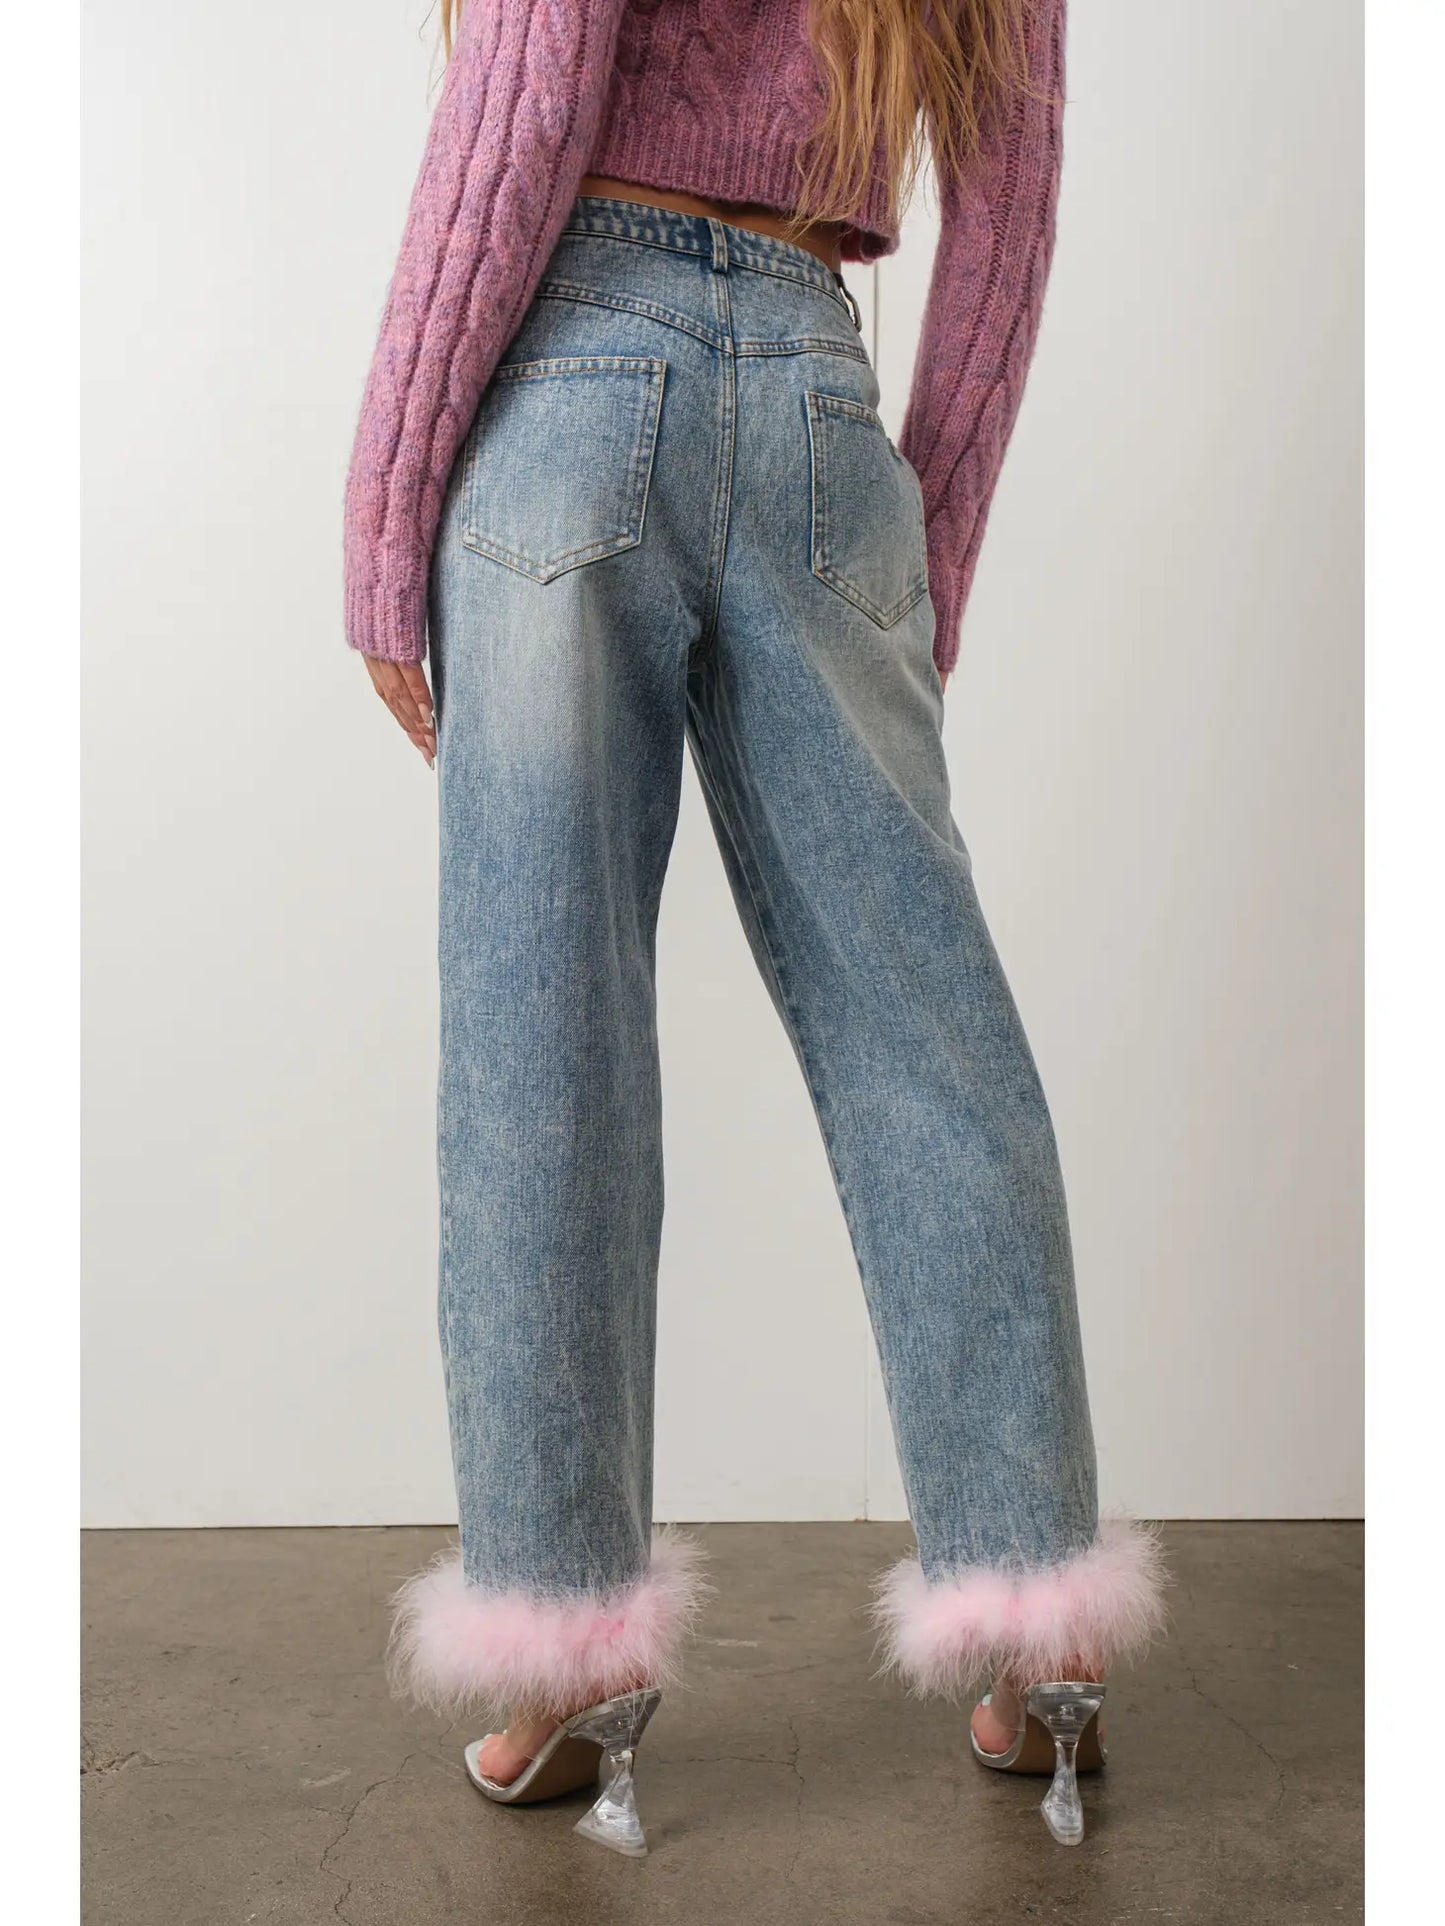 Miss Hayley’s Floofy Feather Jeans